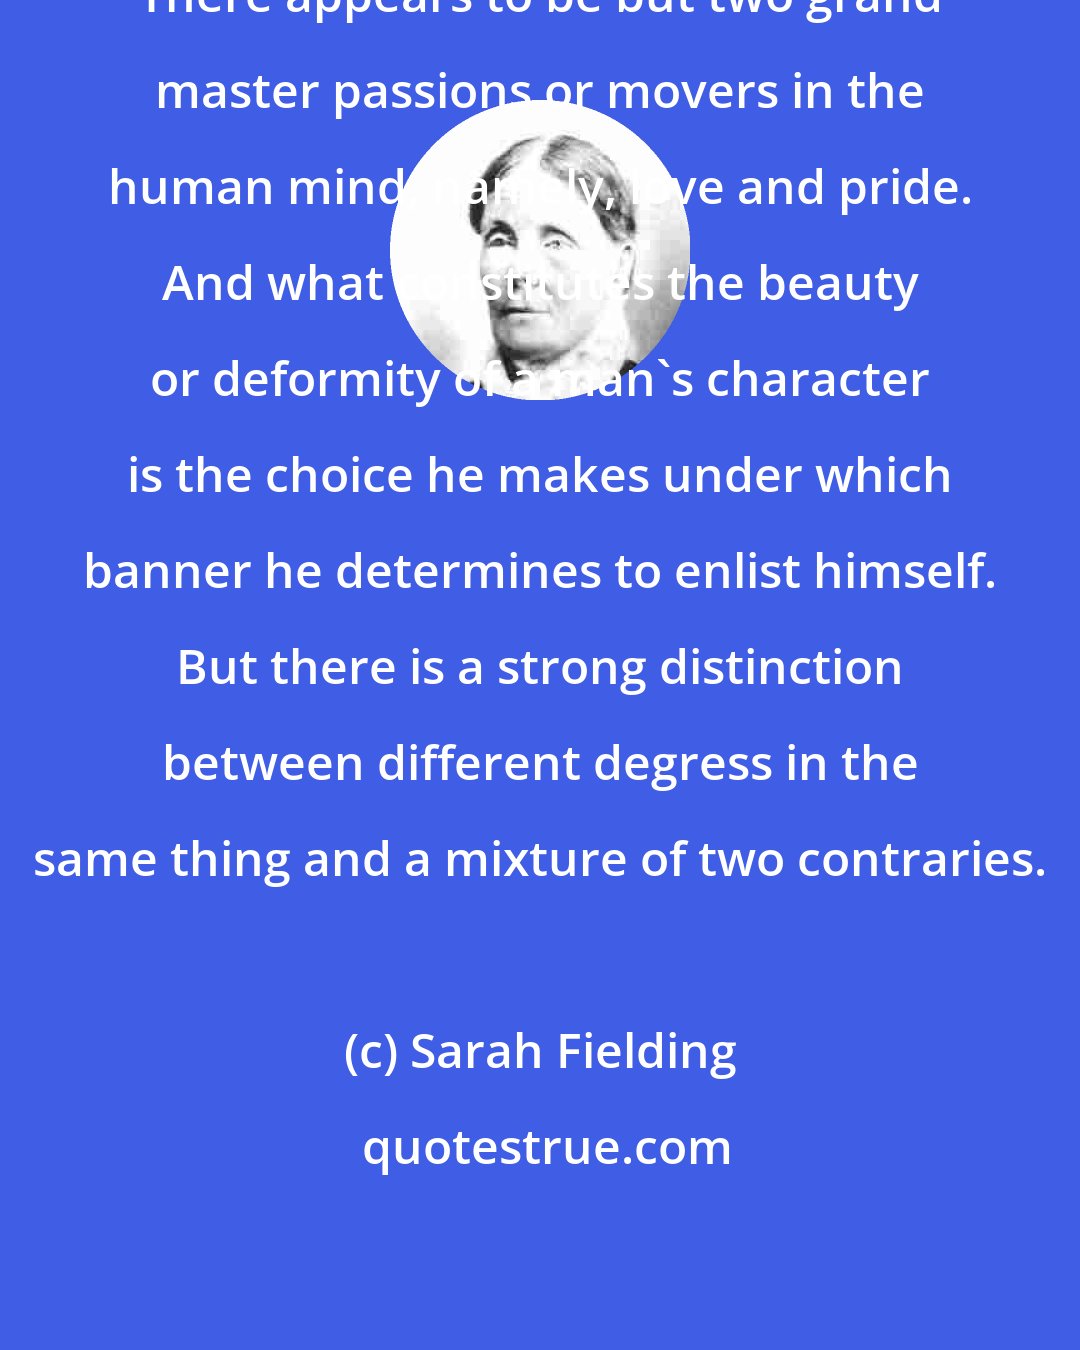 Sarah Fielding: There appears to be but two grand master passions or movers in the human mind, namely, love and pride. And what constitutes the beauty or deformity of a man's character is the choice he makes under which banner he determines to enlist himself. But there is a strong distinction between different degress in the same thing and a mixture of two contraries.